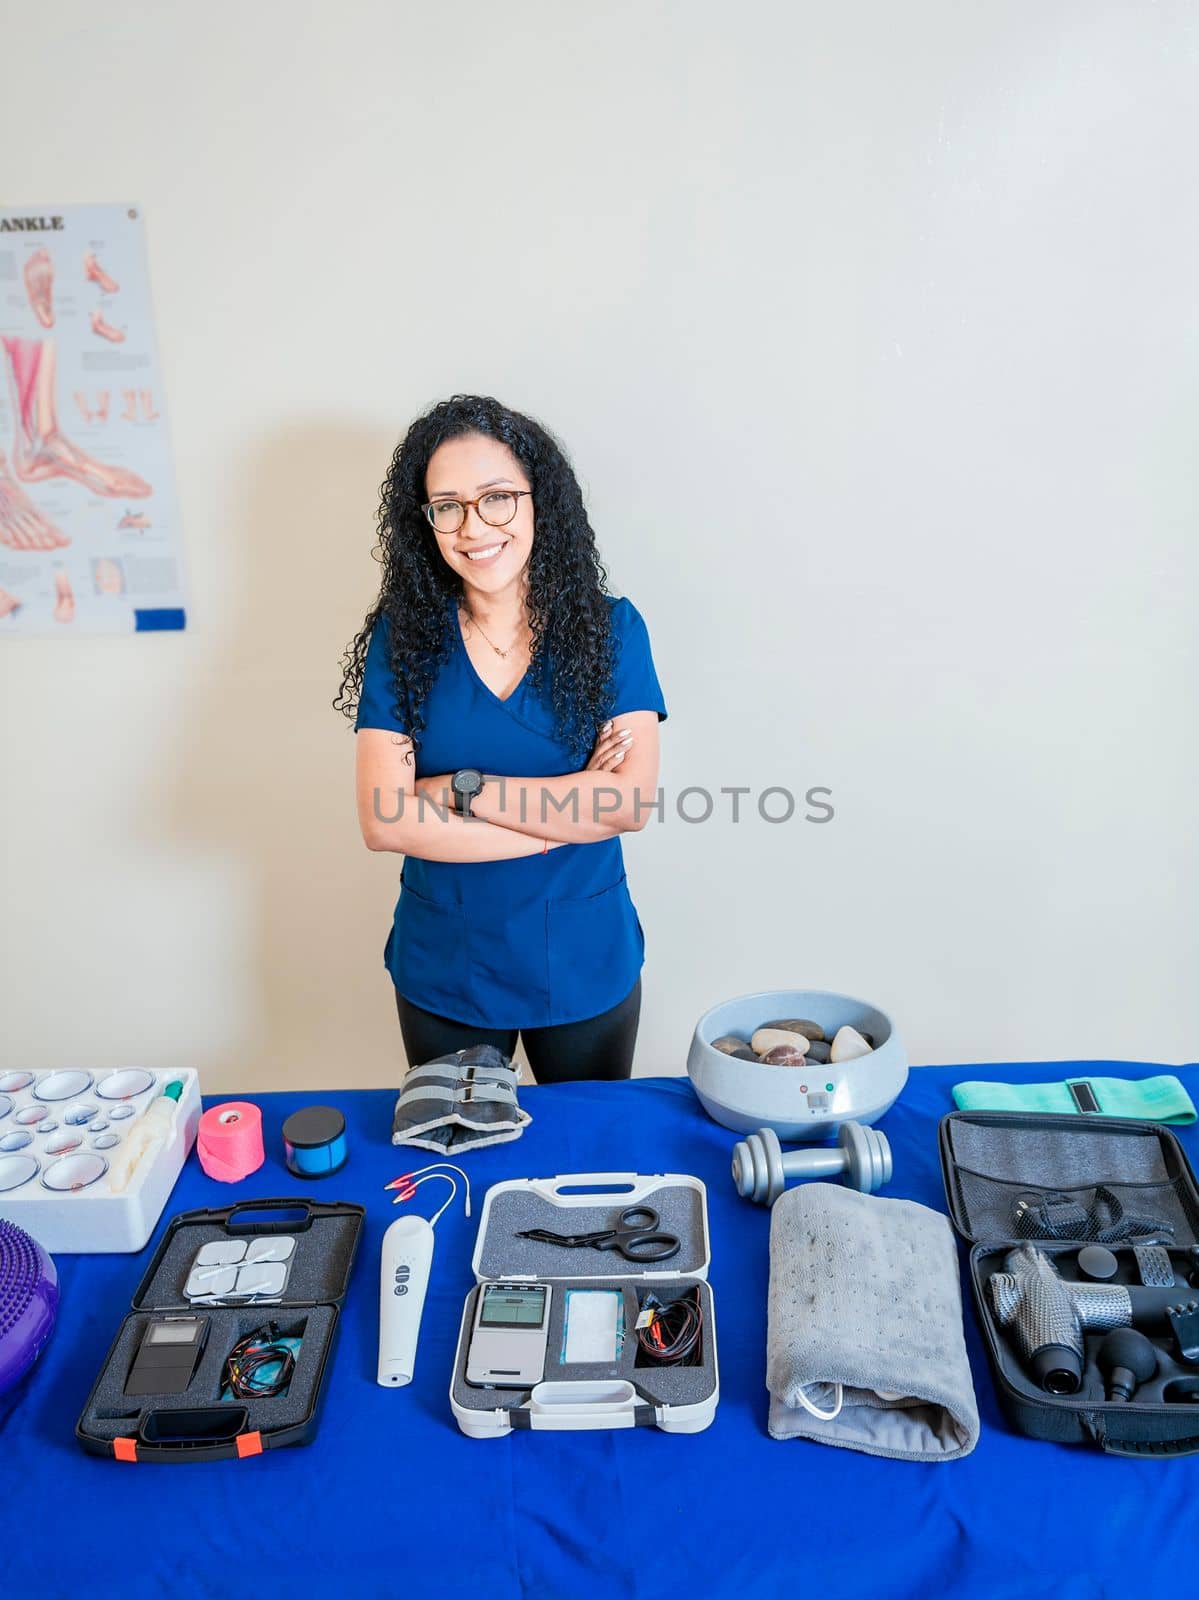 Physiotherapist with physiotherapy accessories. Smiling physiotherapist showing physiotherapy accessories, Physiotherapist woman showing therapy accessories and equipment by isaiphoto